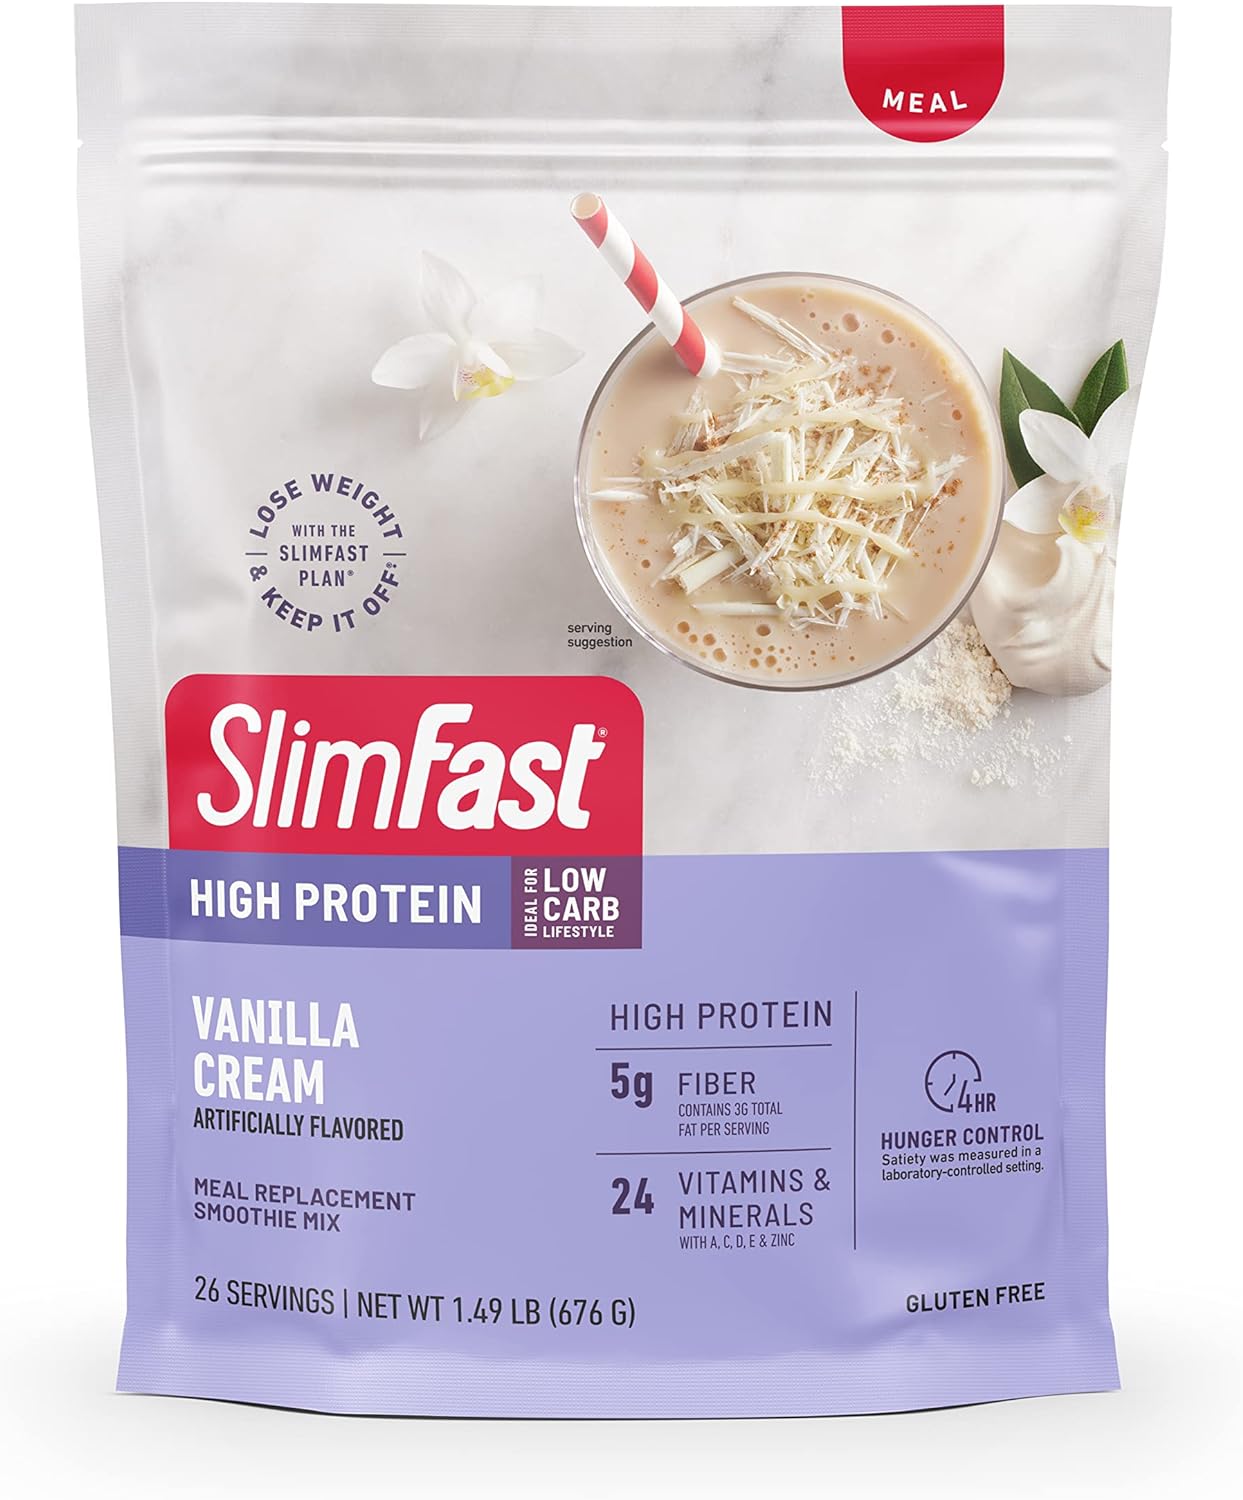 SlimFast High Protein Meal Replacment Powder, 26 Servings, Advanced Nu1.53 Pounds